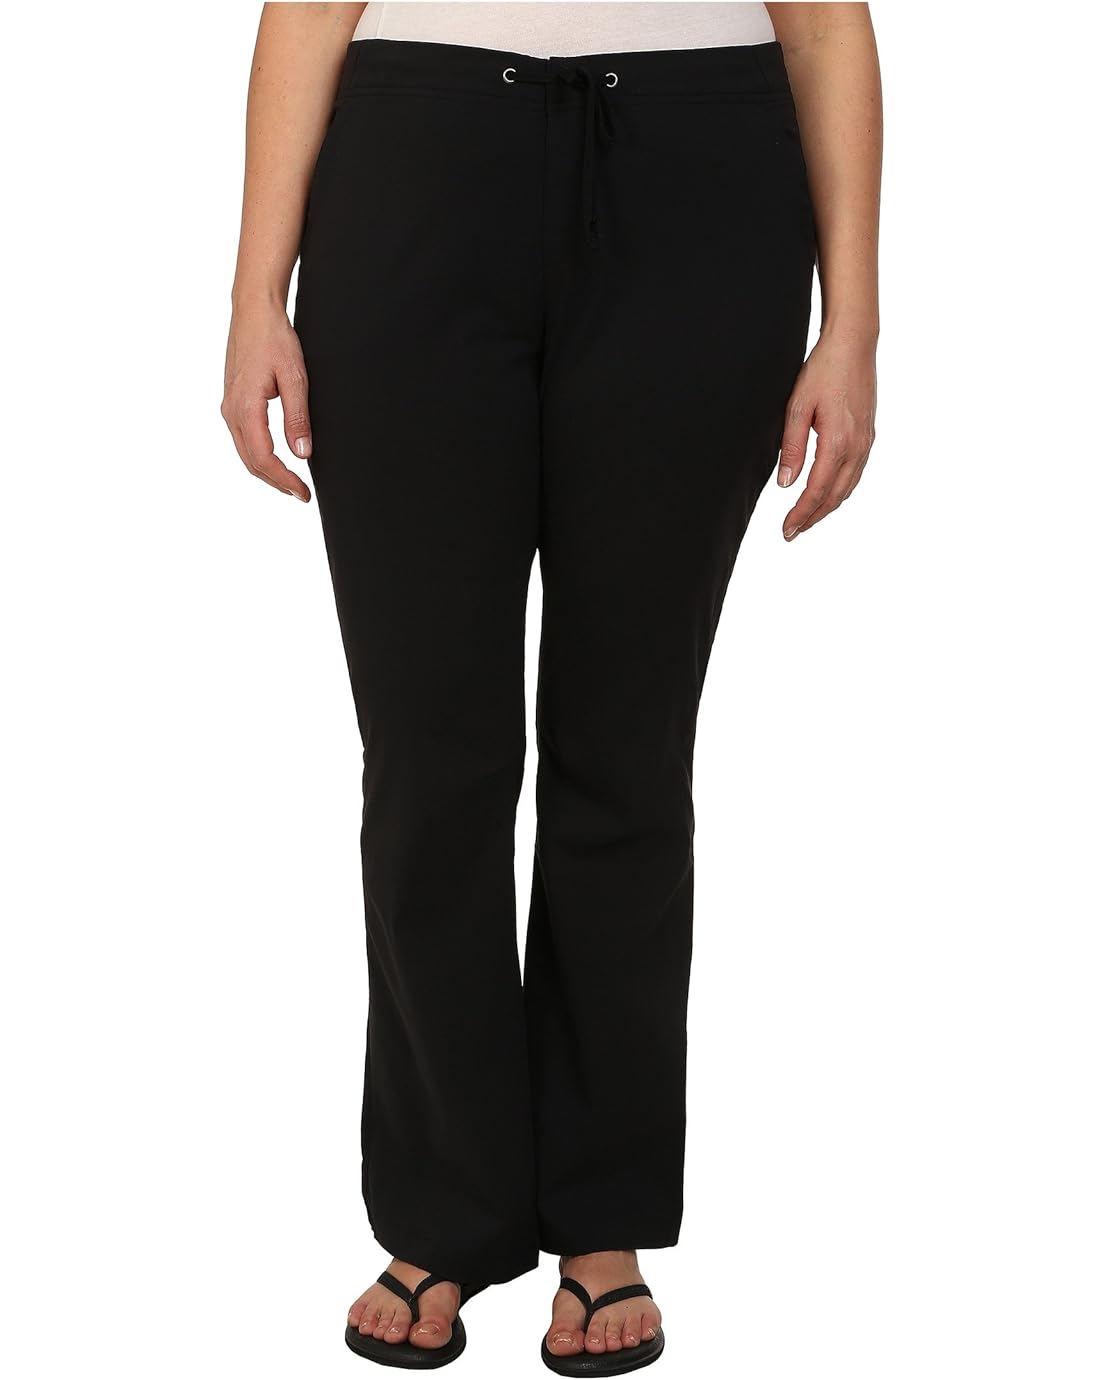 Columbia Plus Size Anytime Outdoor Boot Cut Pant